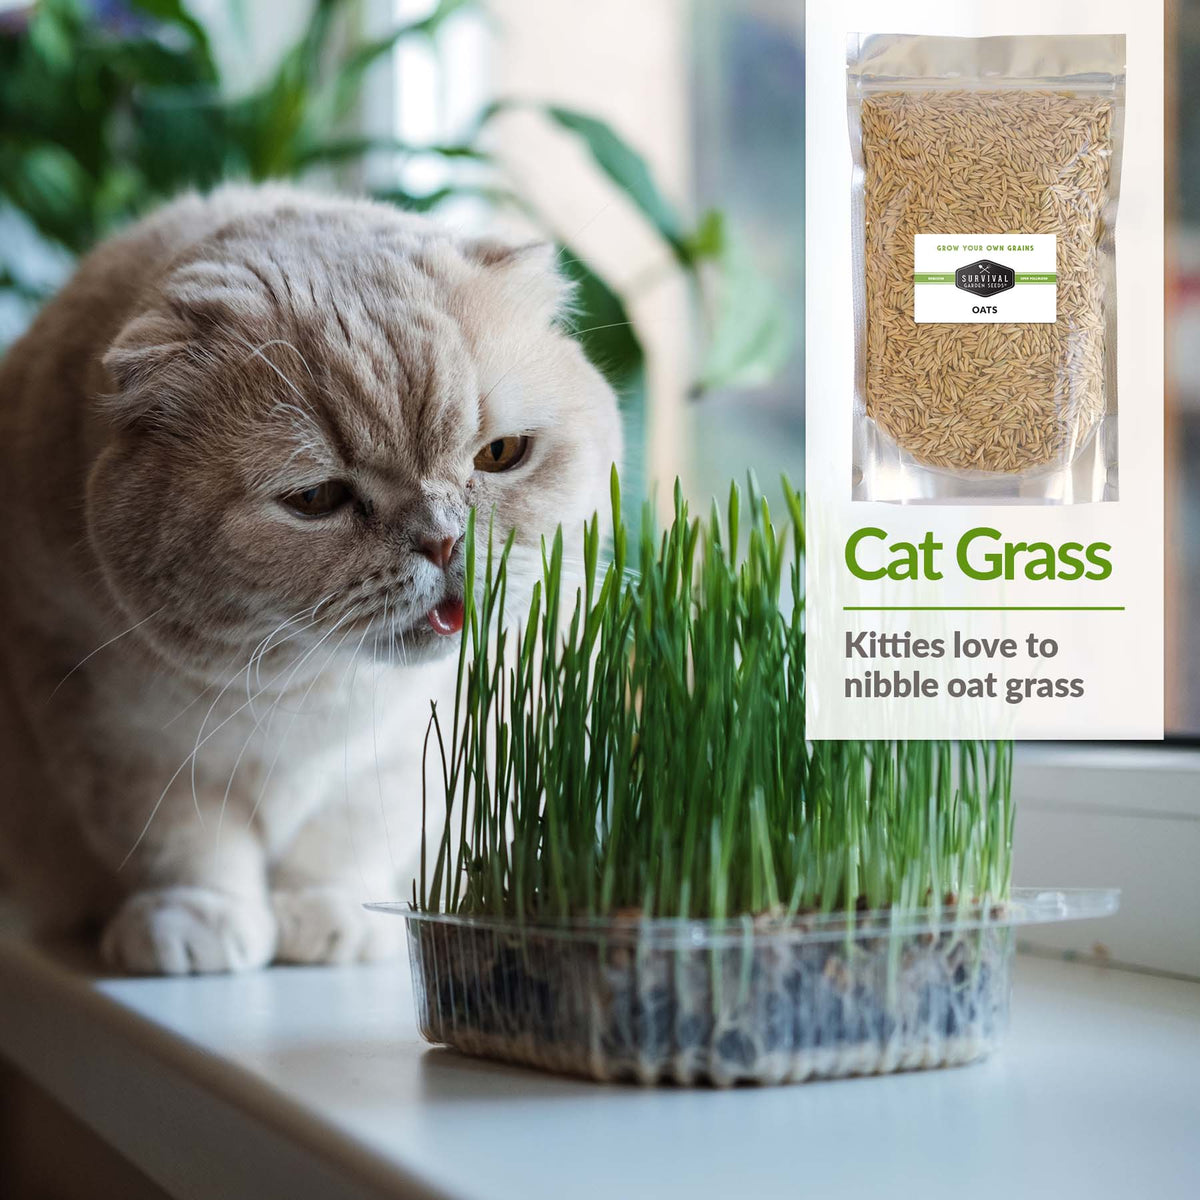 Oat grass is great for cats